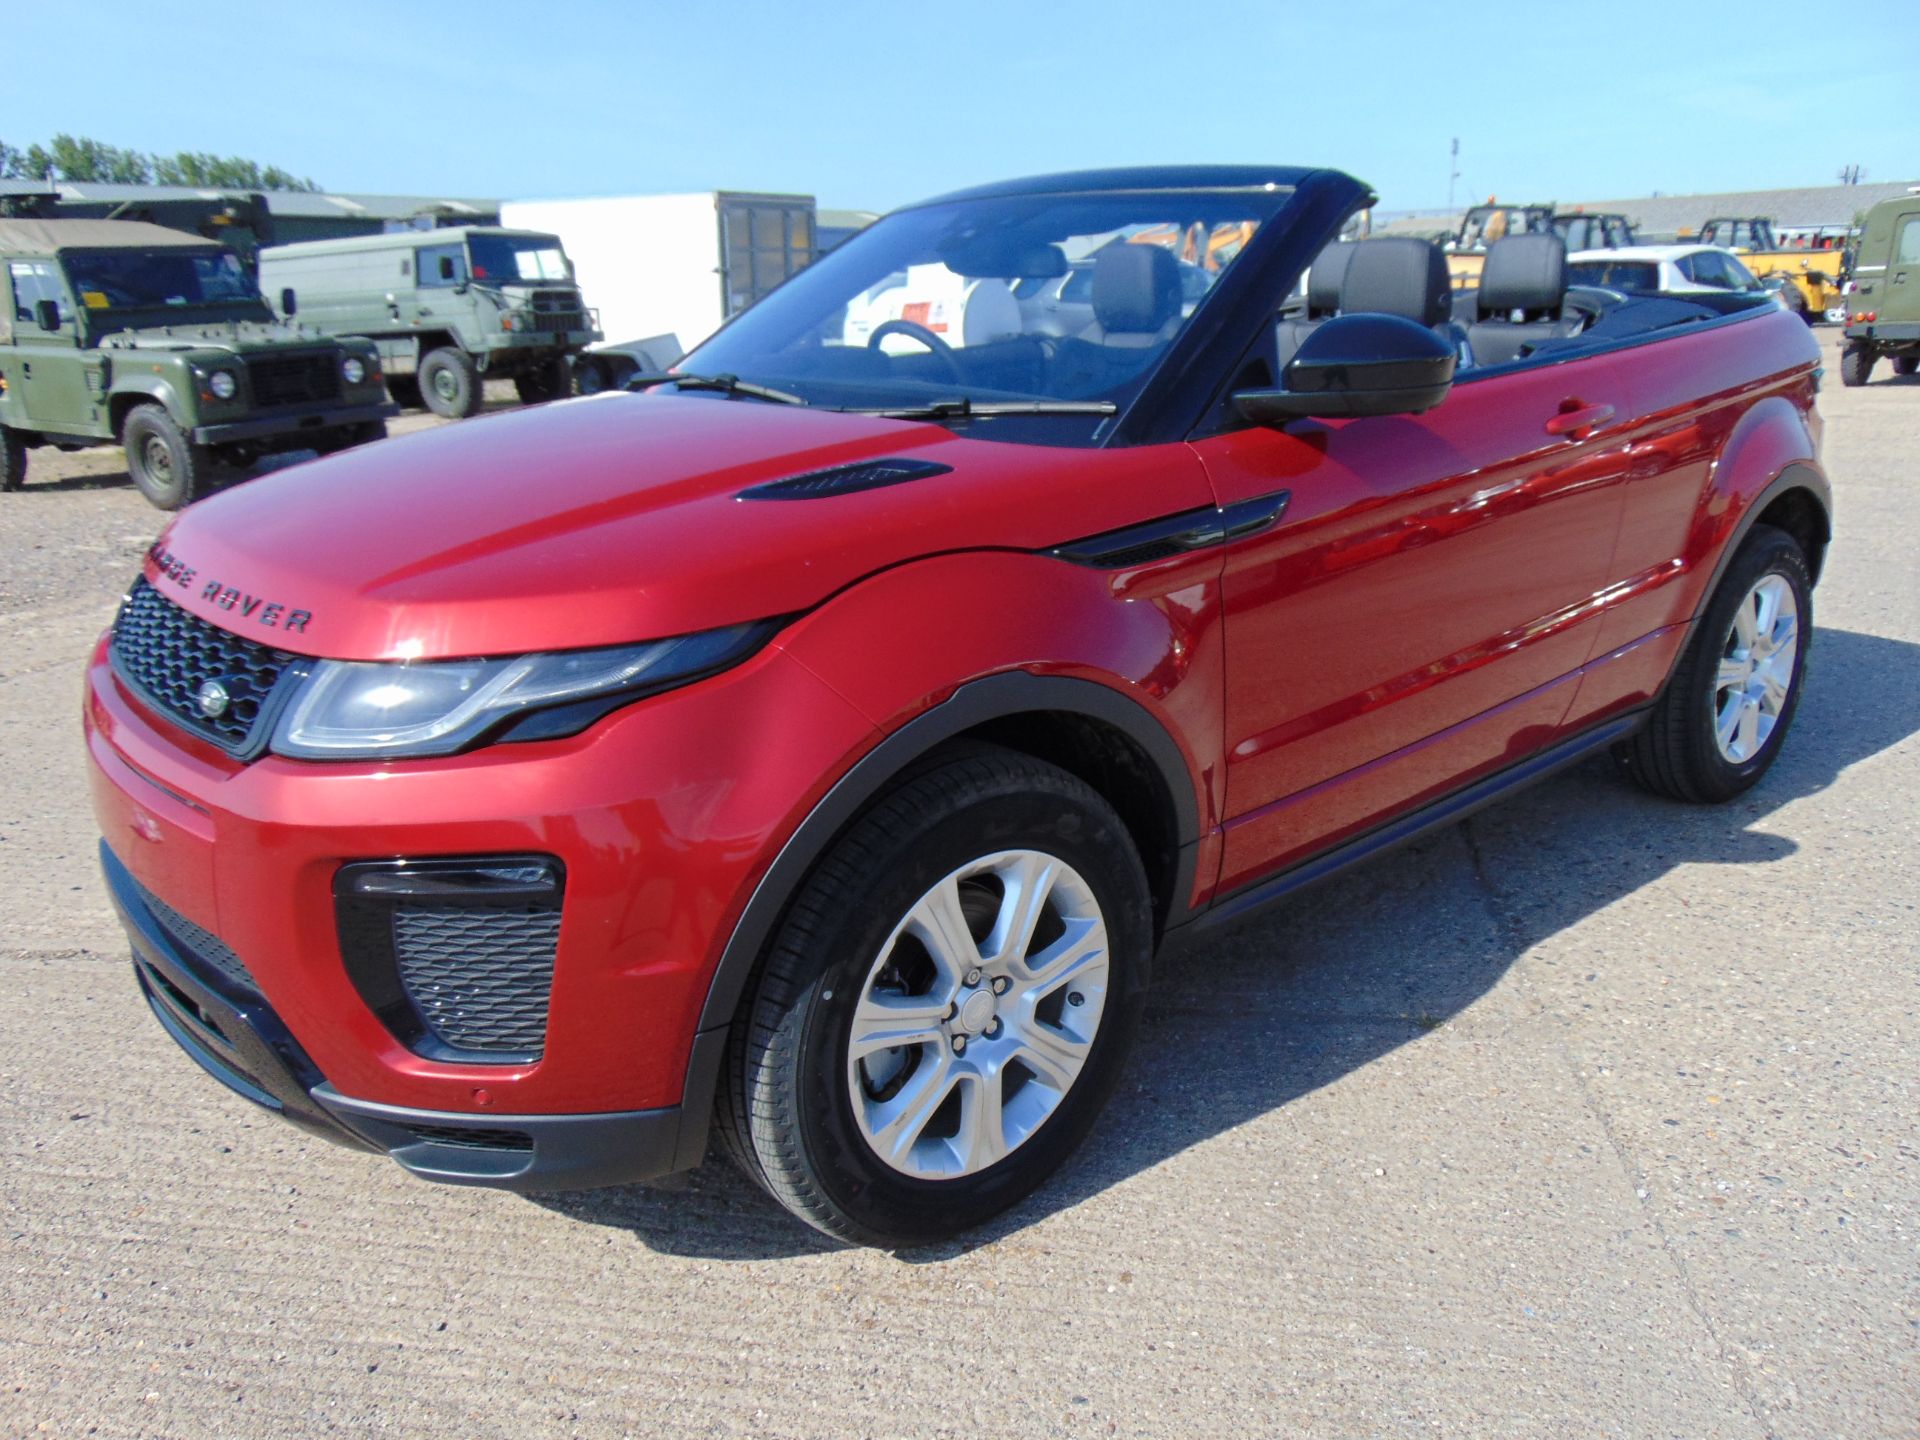 NEW UNUSED Range Rover Evoque 2.0 i4 HSE Dynamic Convertible - Image 3 of 39